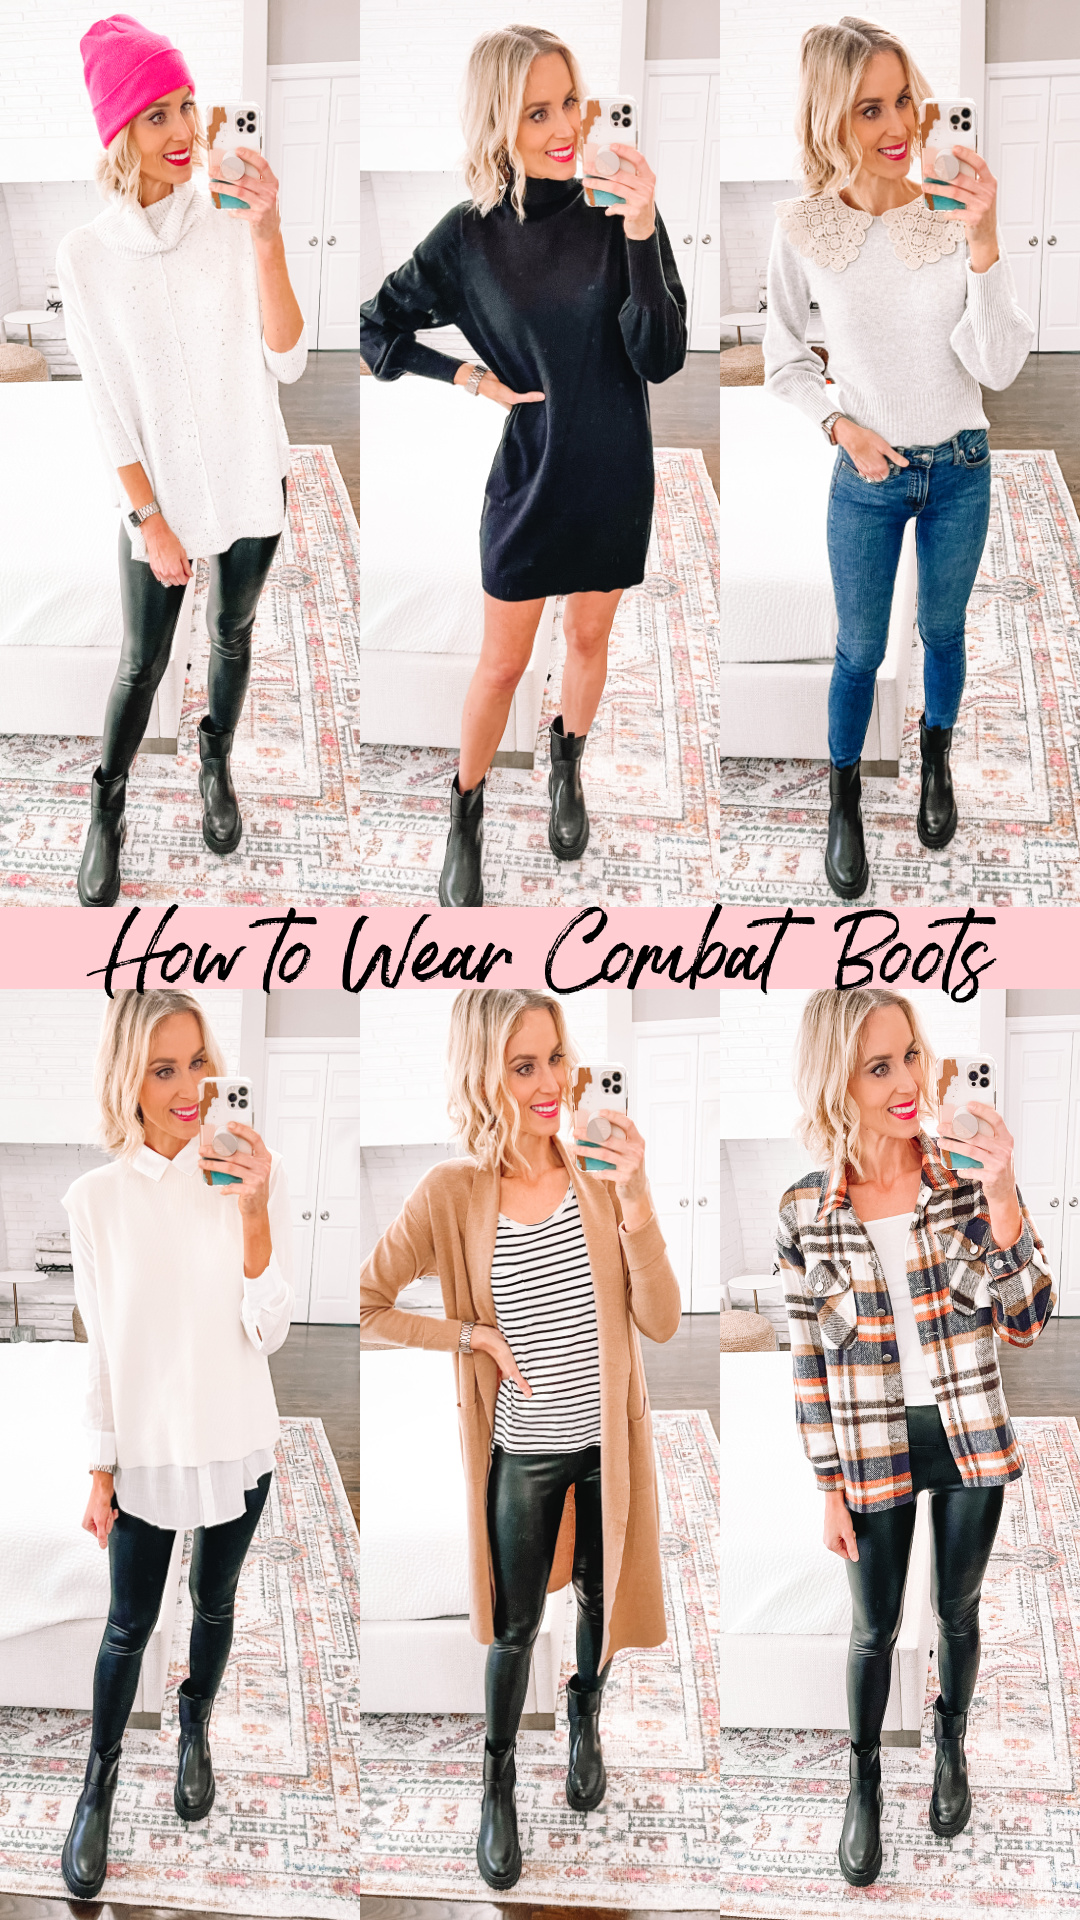 Wearing Tall Boots with Dresses & Confident Twosday Linkup - I do